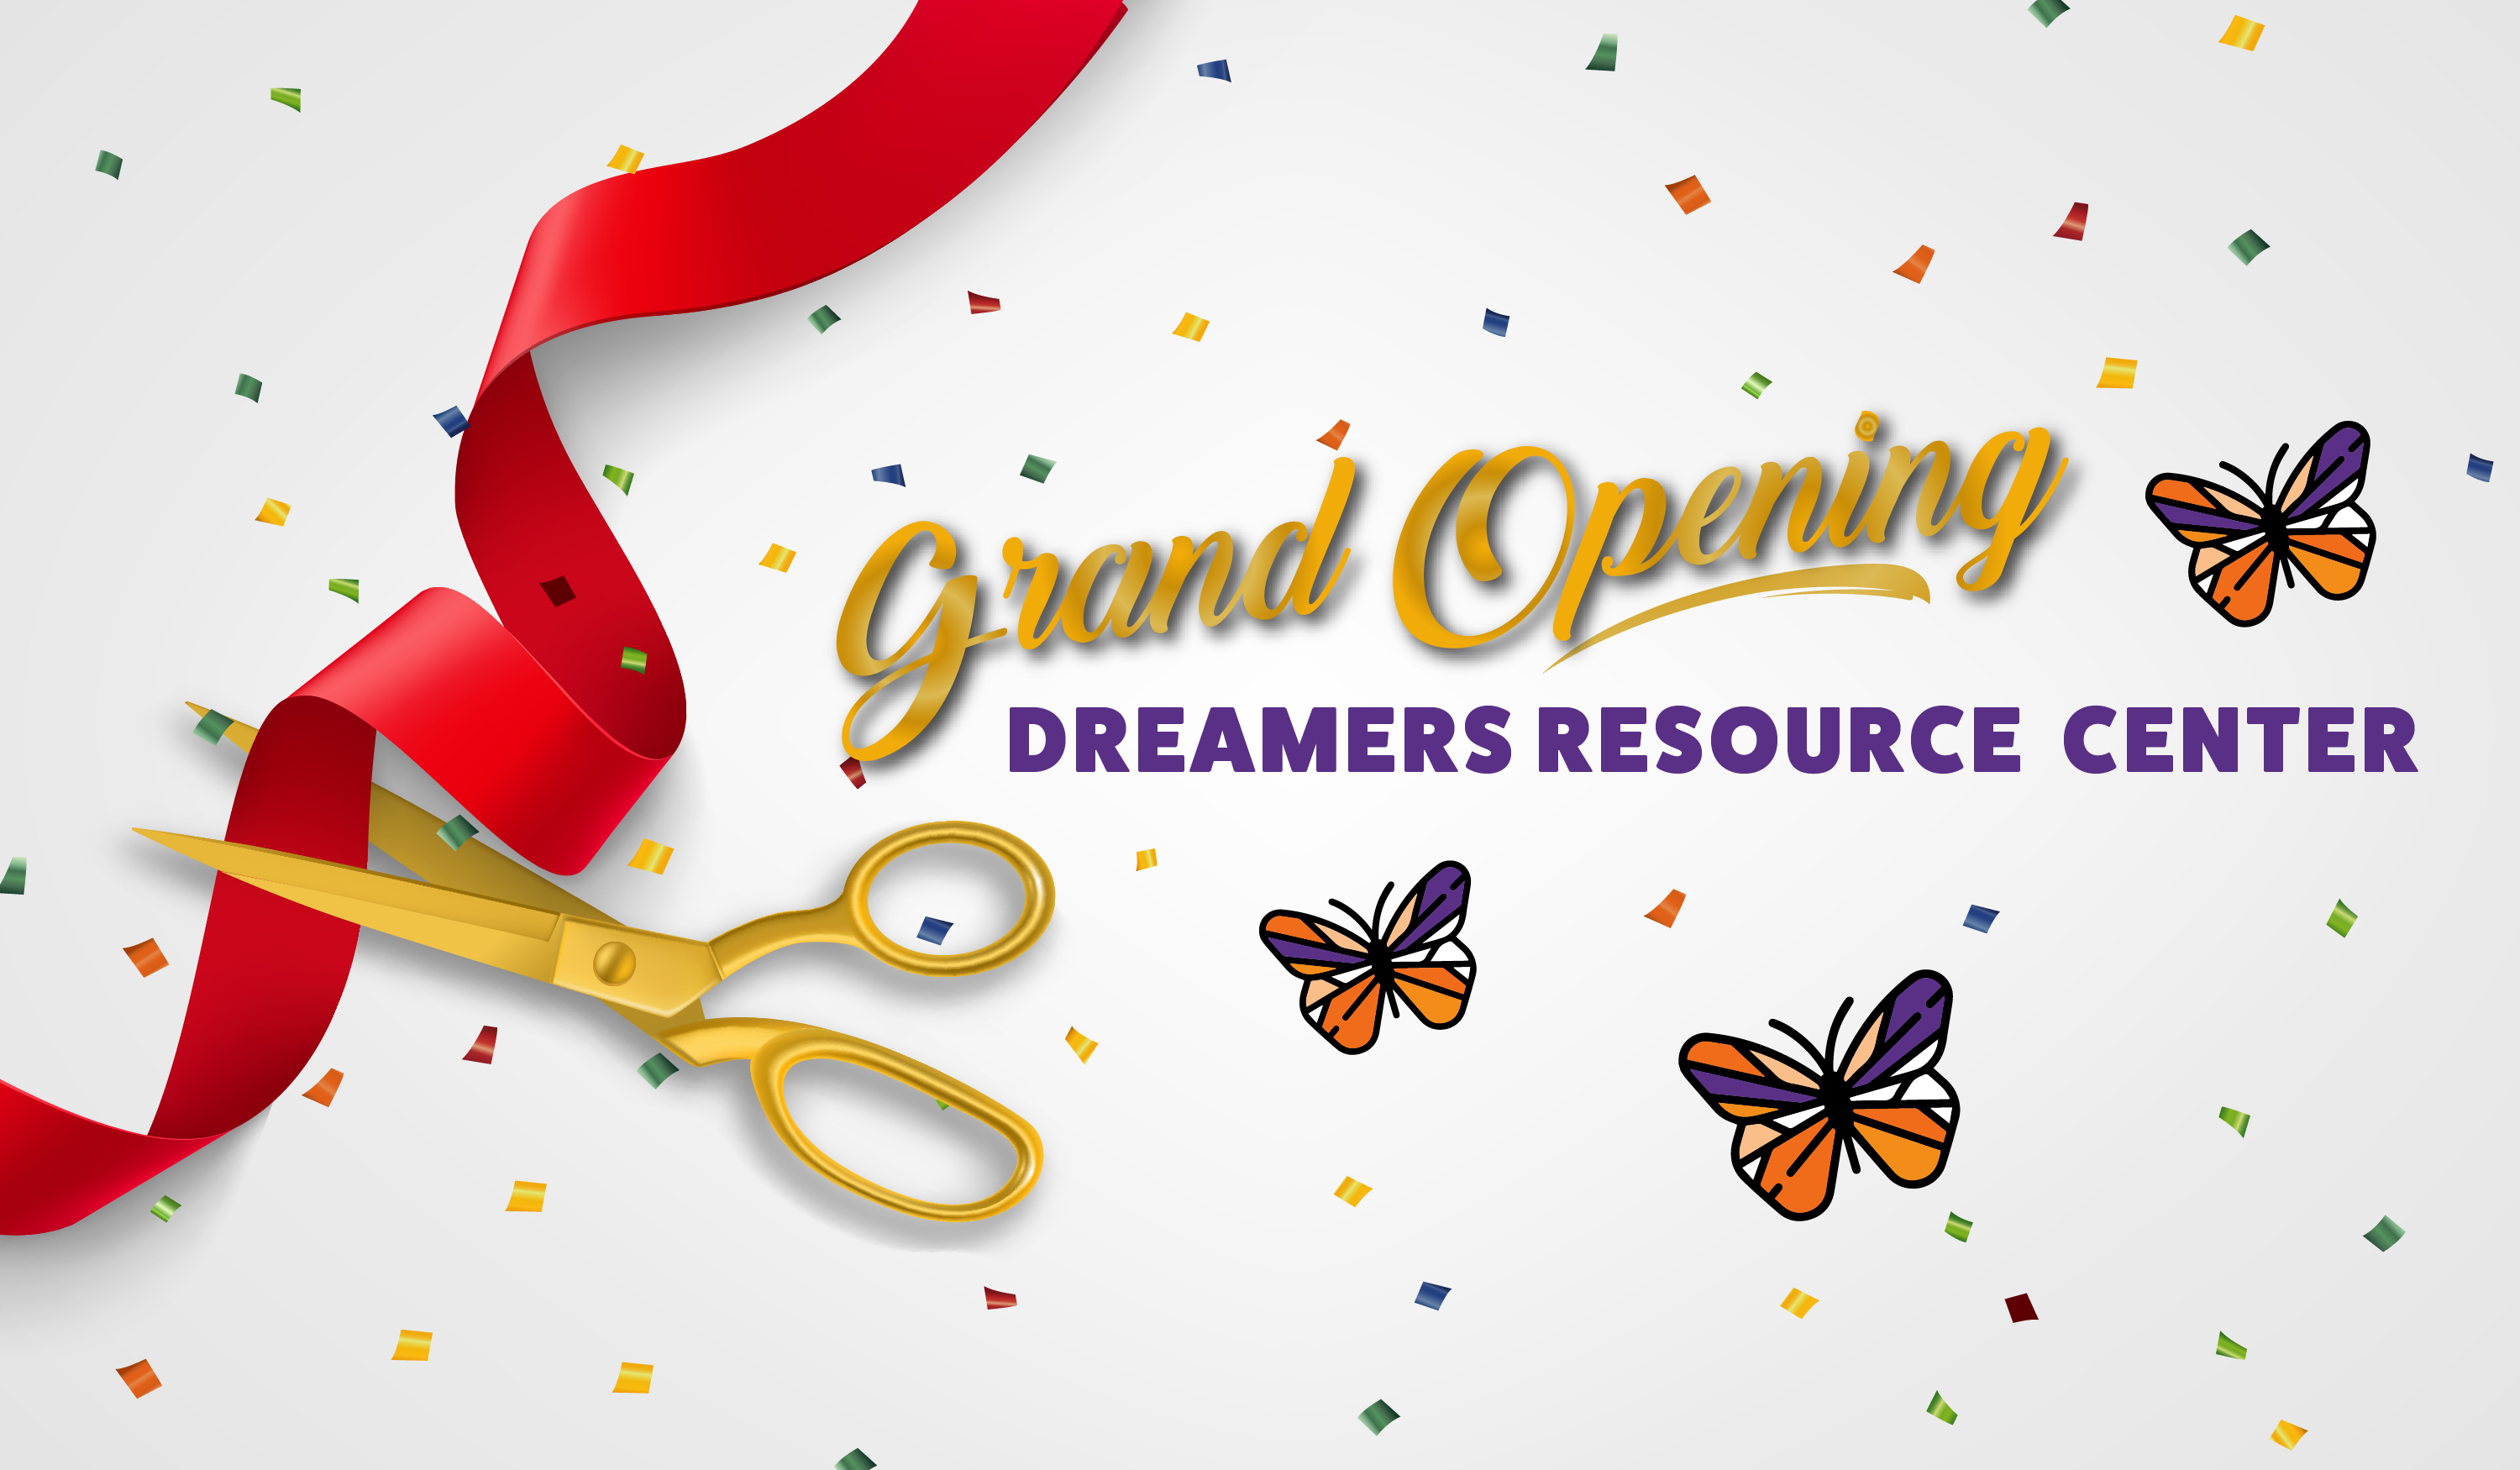 Grand Opening Dreamers Resource Center